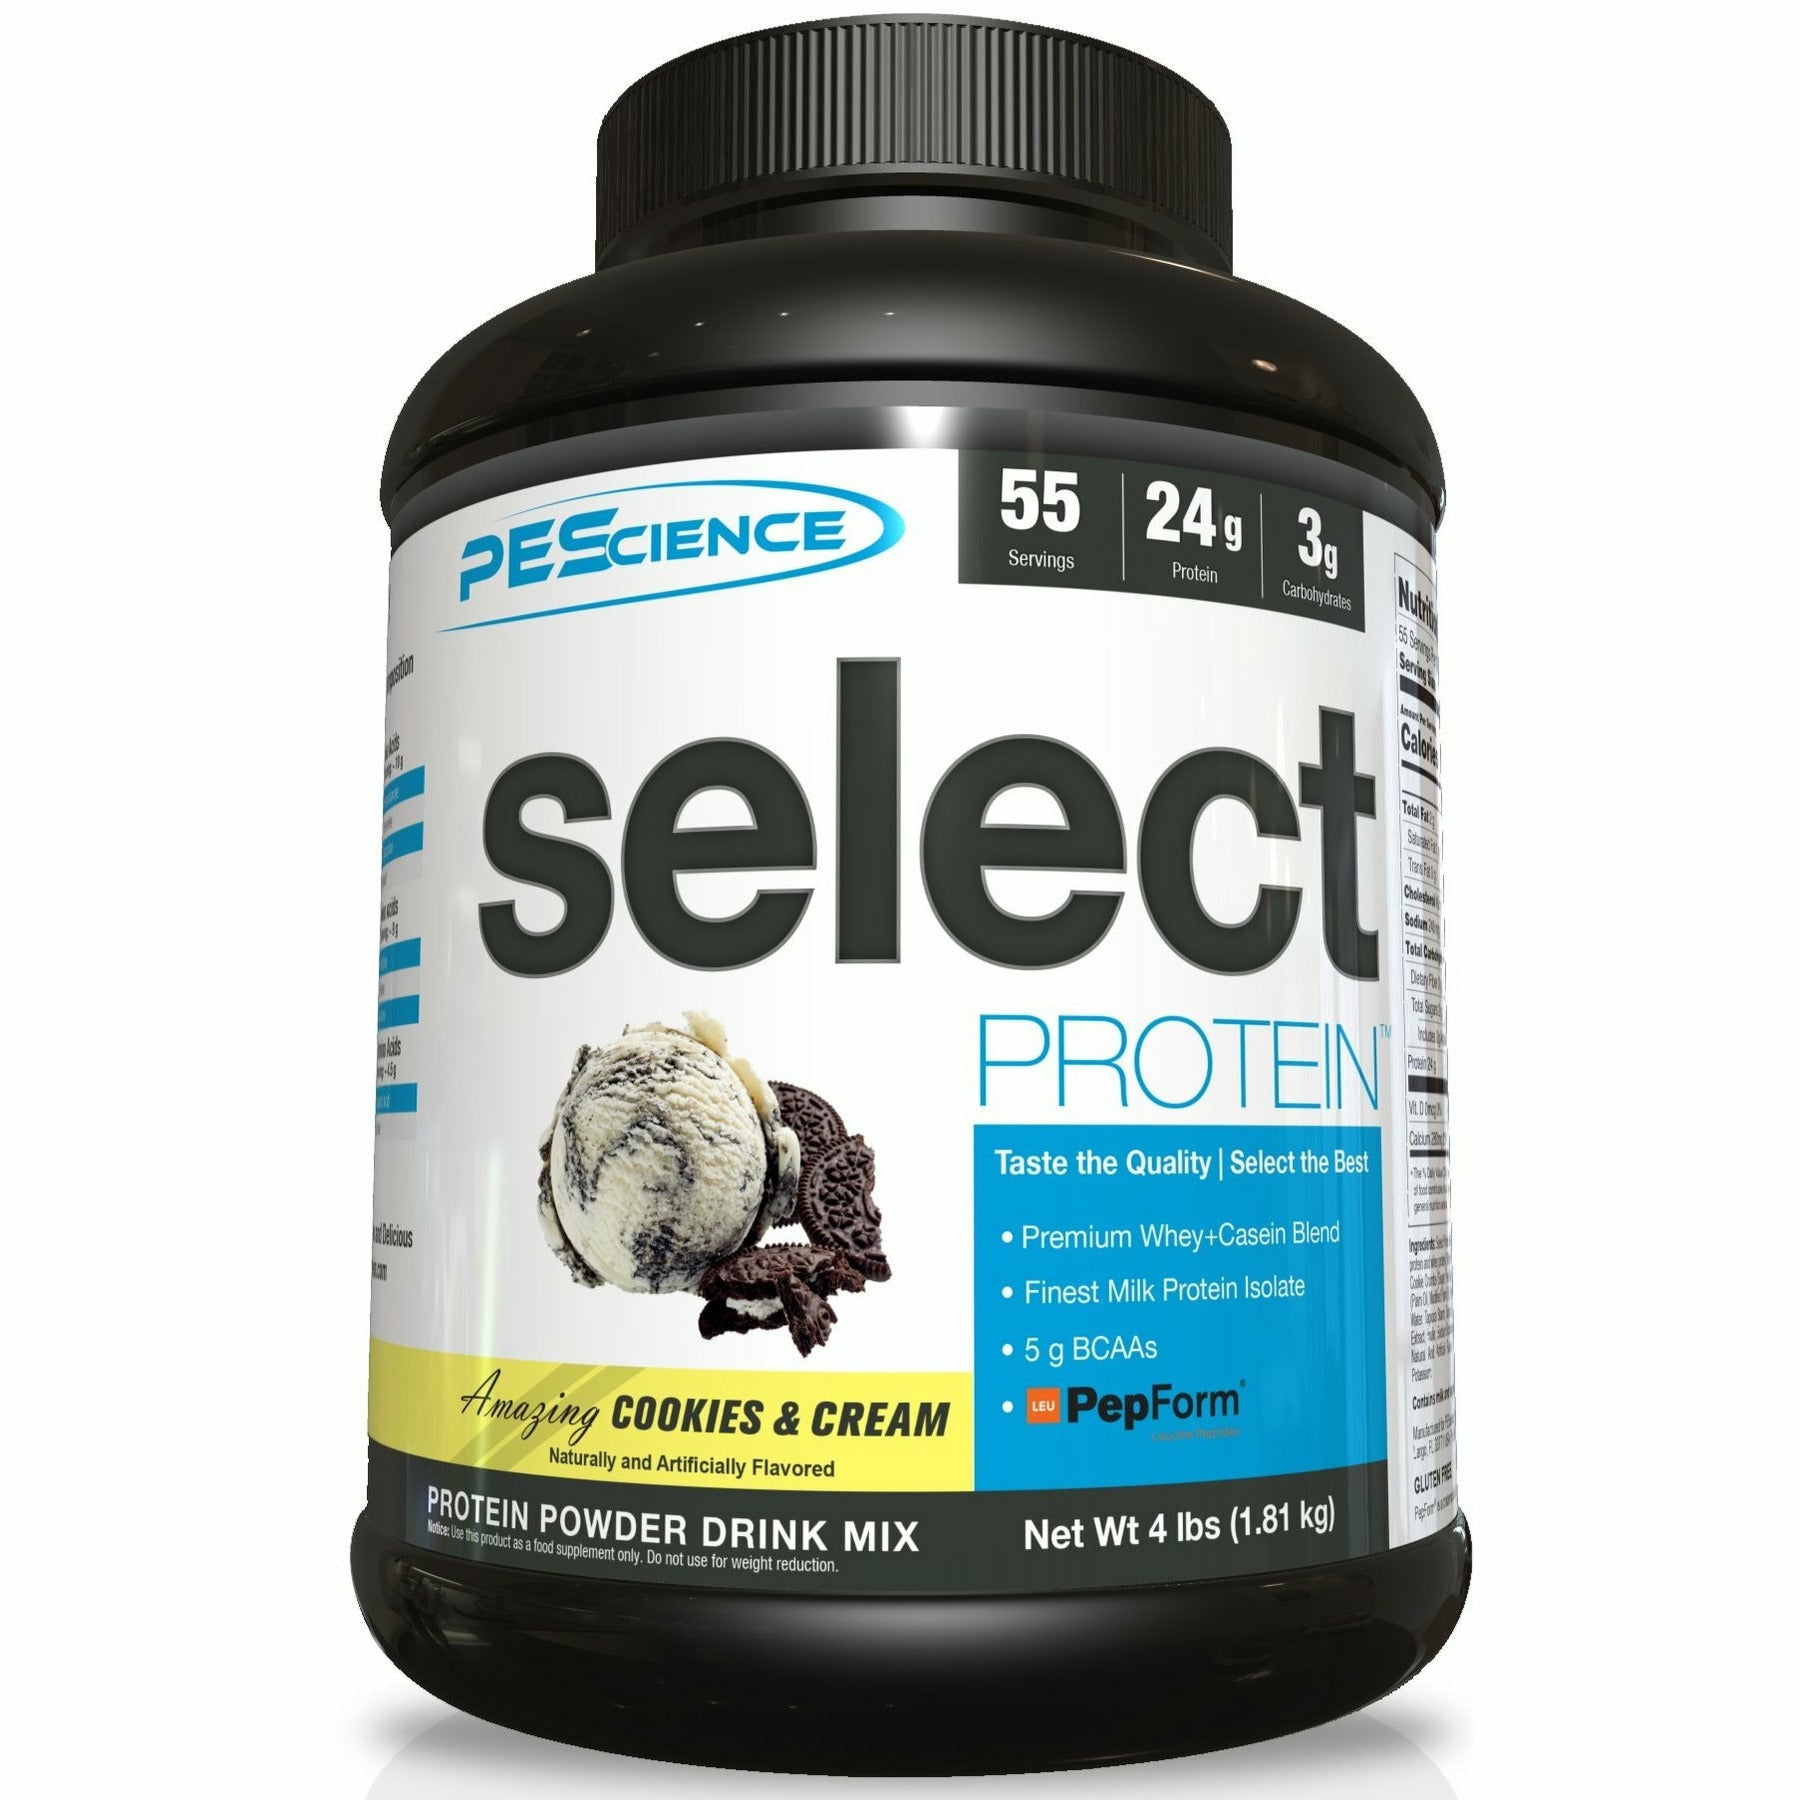 PEScience Select Protein (55 servings) Whey Protein Blend Cookies & Cream PEScience